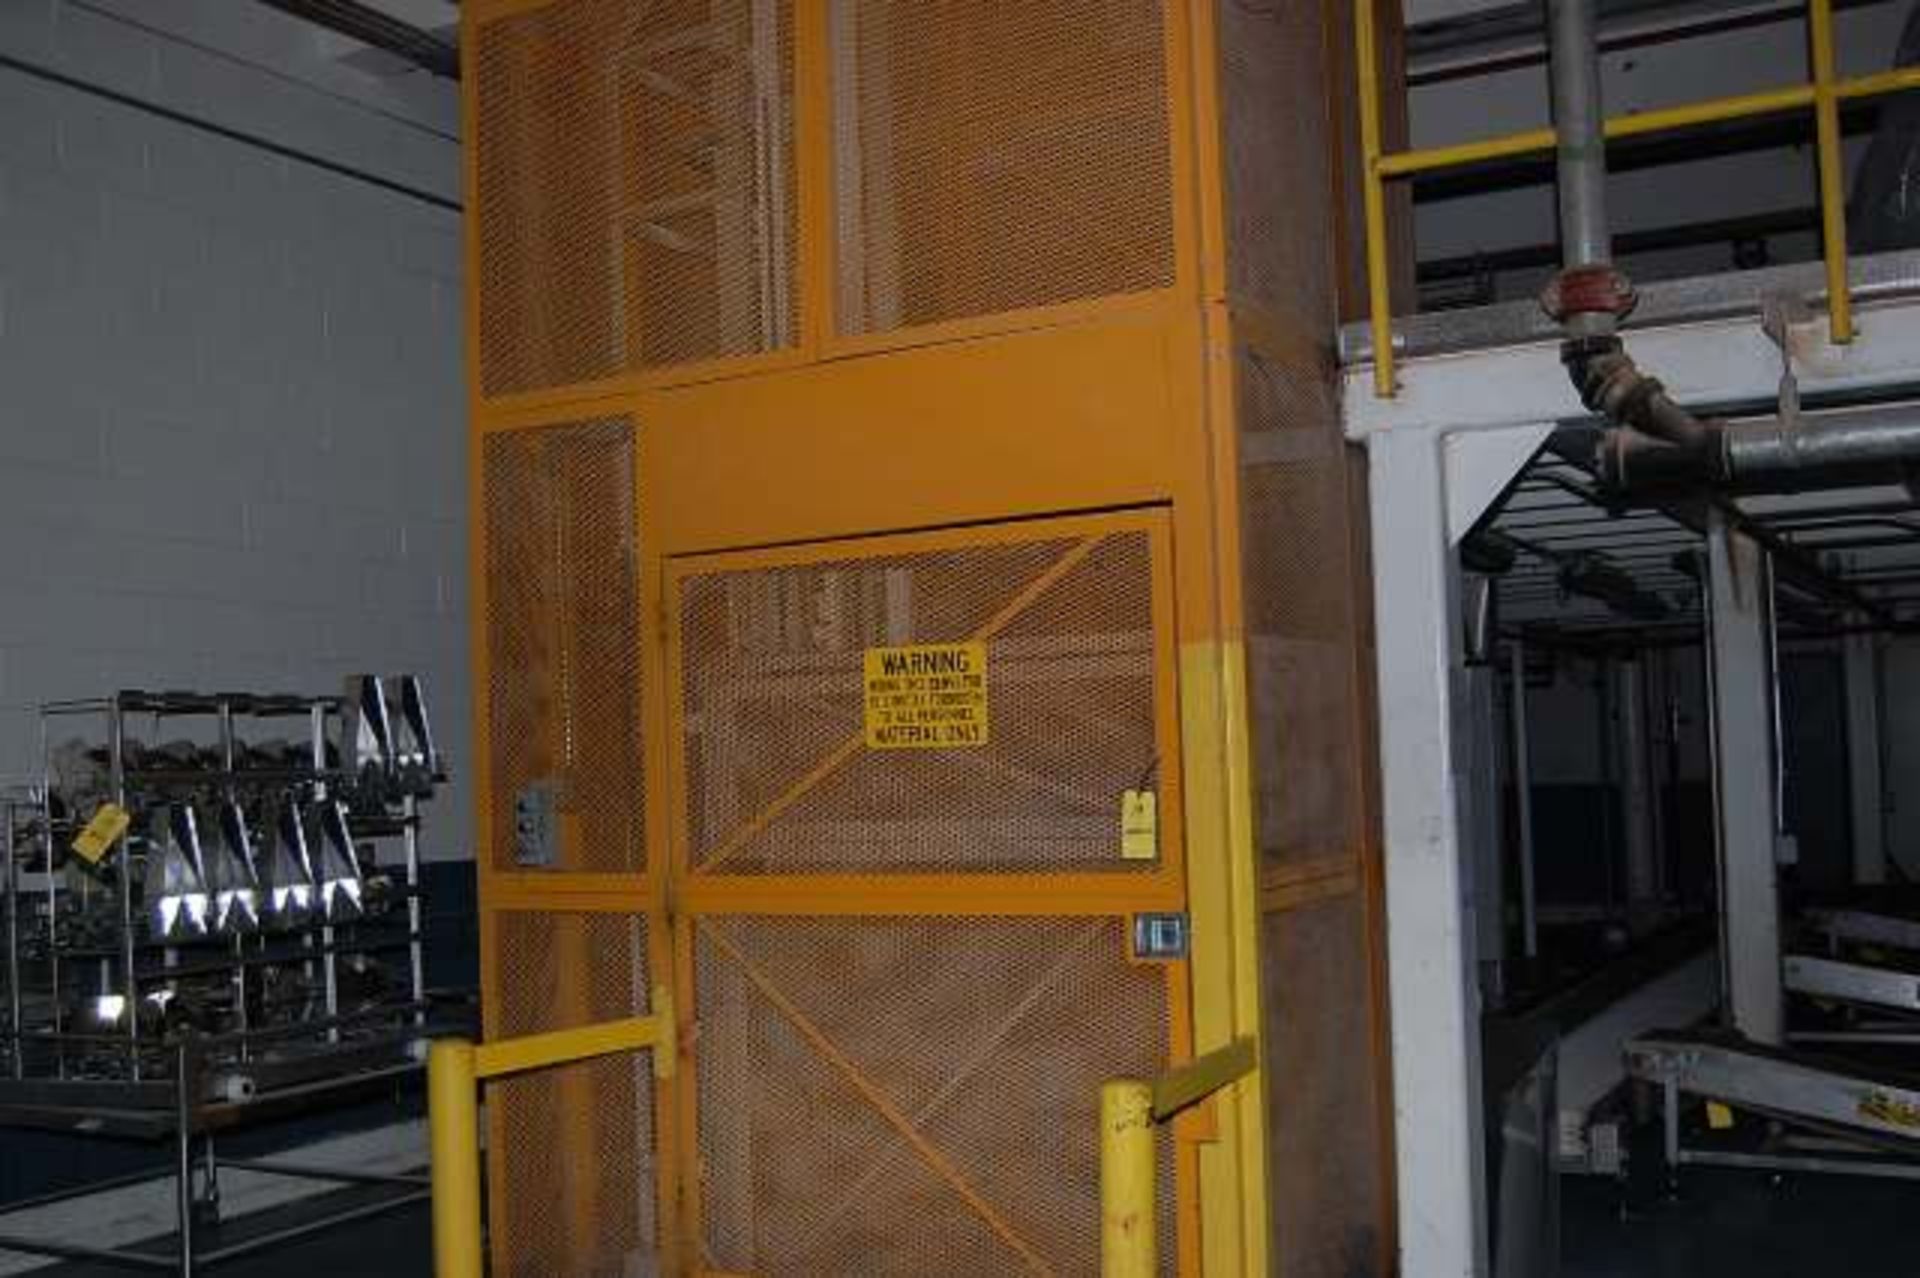 Langley Hydraulic Lift, 60 in. x 58 in. Platform, Approx. 8 ft. Lift Ht., Safety Guard w/Door